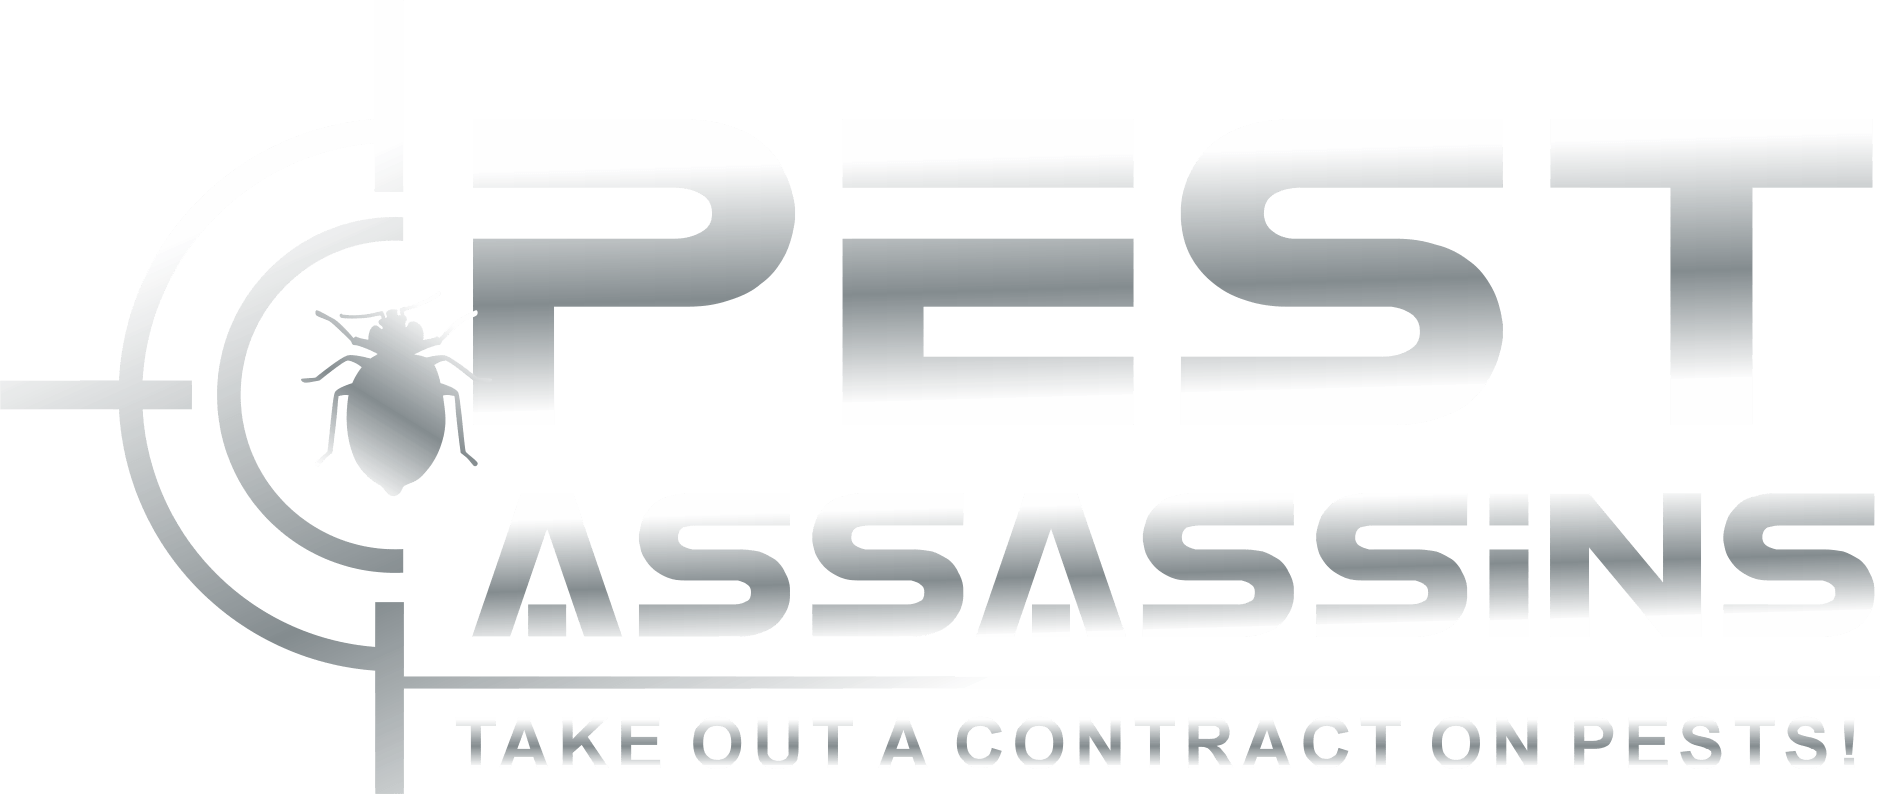 Pest Assassins Logo with a bed bug target and tagline of 